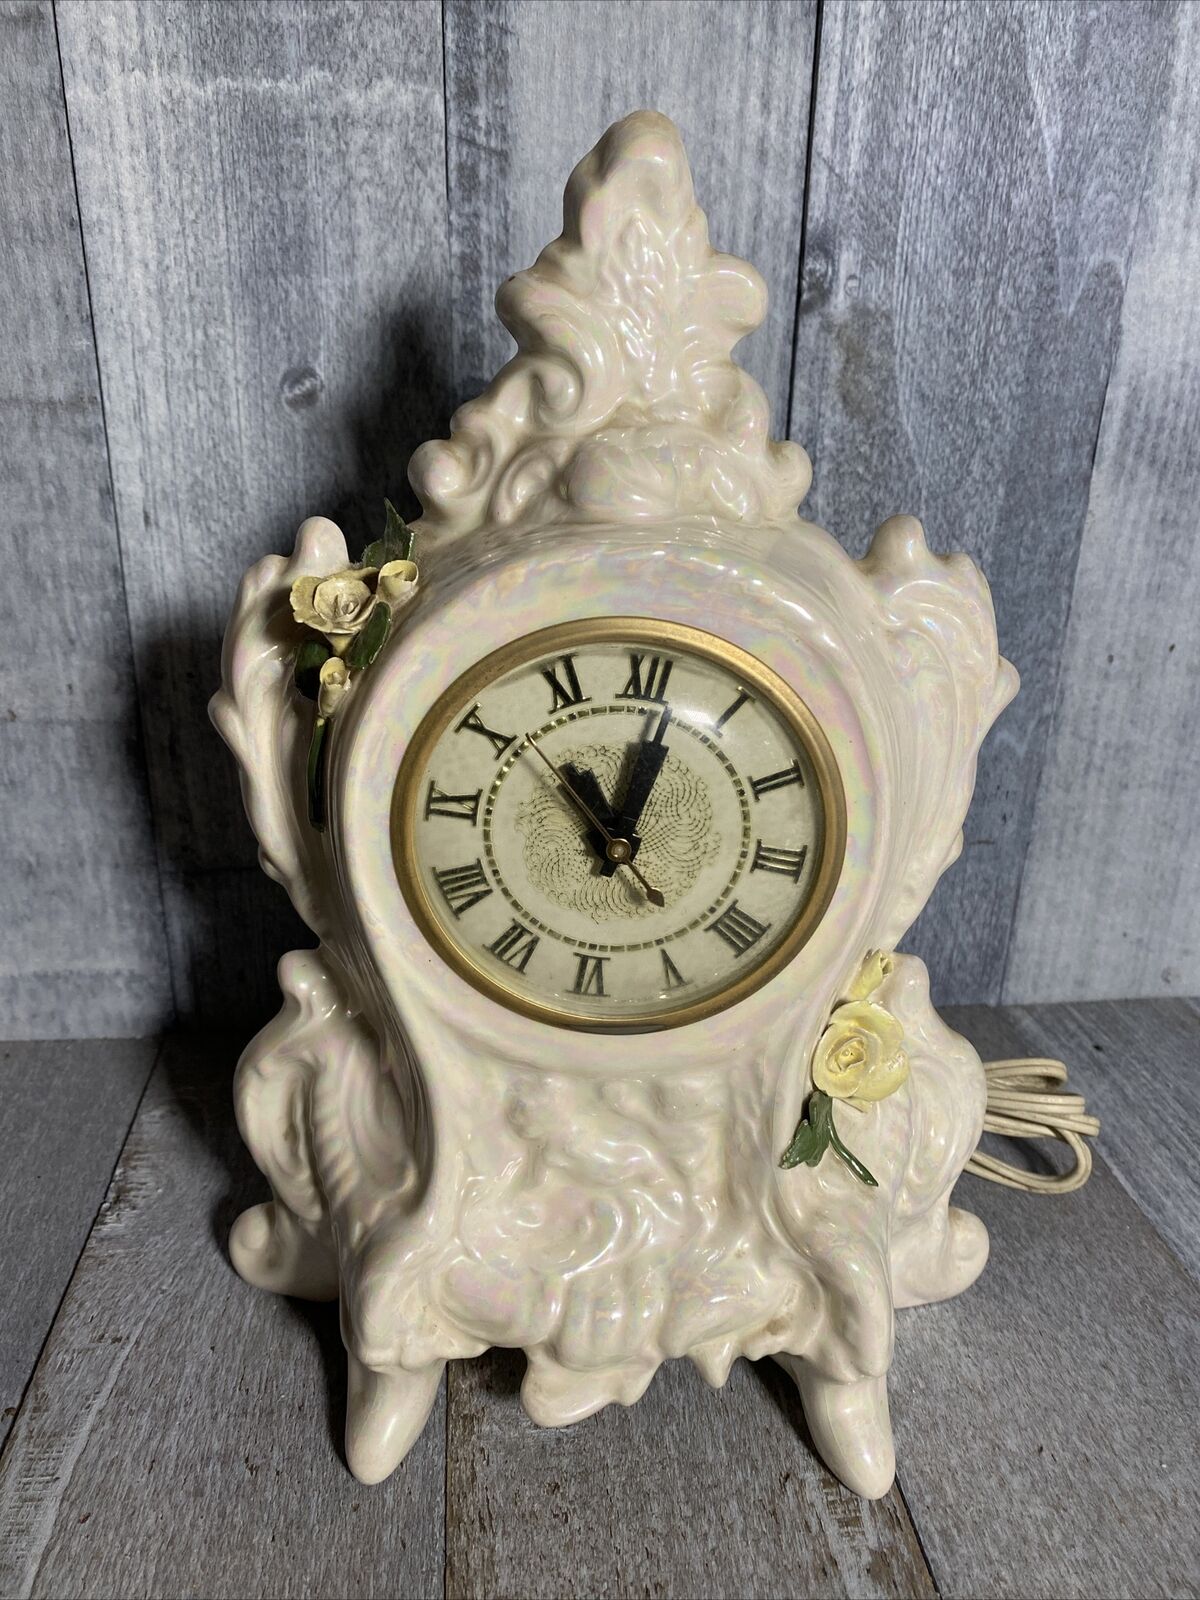 Vintage Clock Movement By Lanshire Opal White Ceramic Porcelain Mother Of Pearl